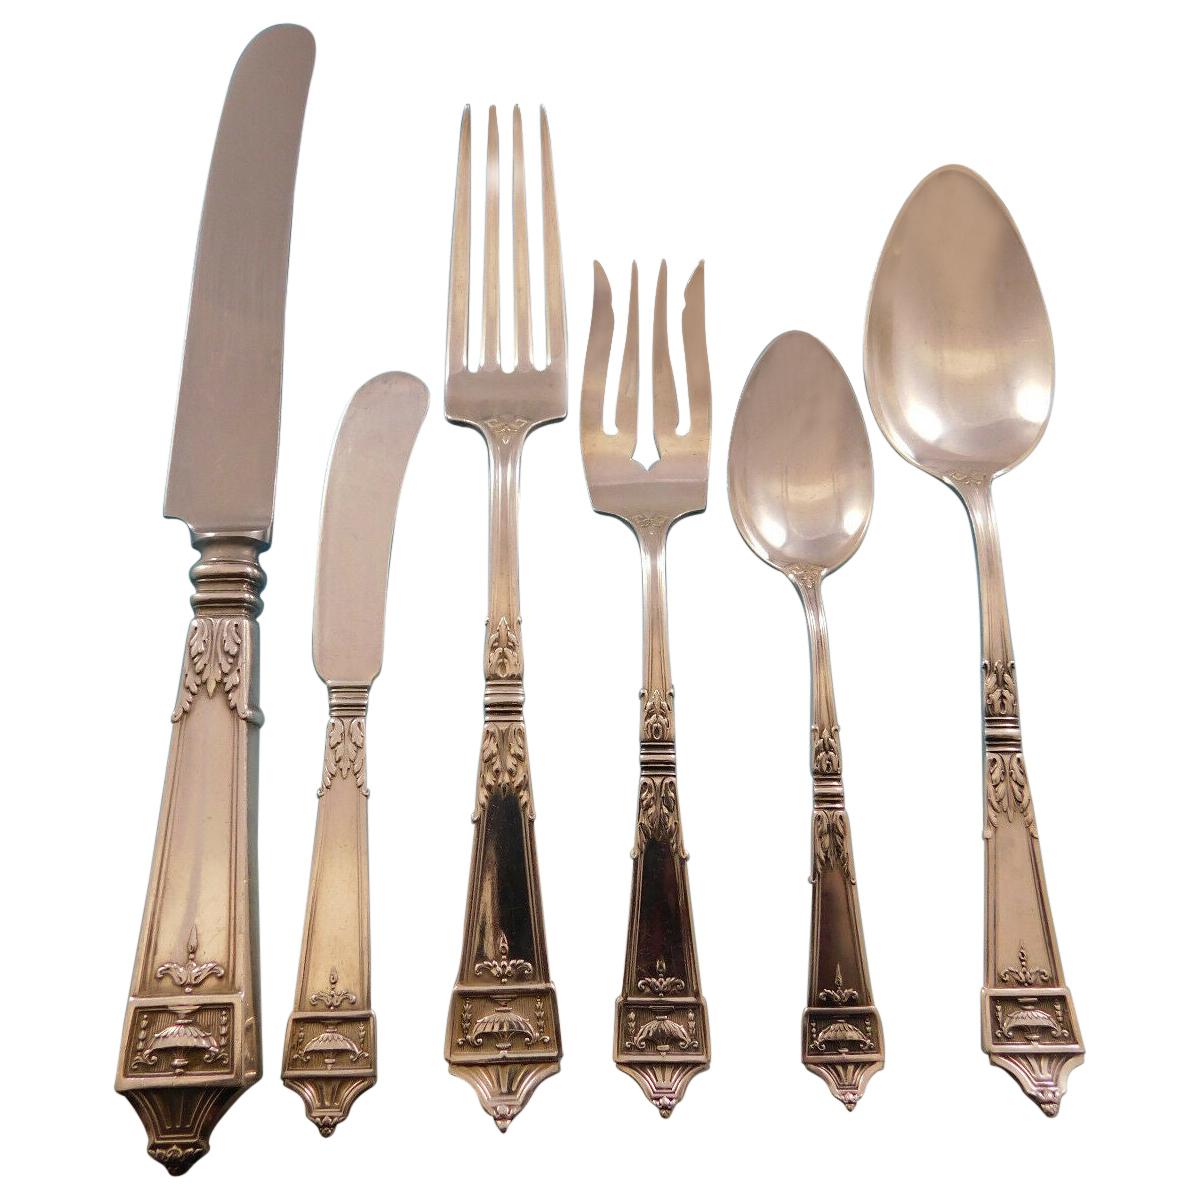 Lansdowne by Gorham Sterling Silver Flatware Set for 12 Service 82 Pieces Dinner